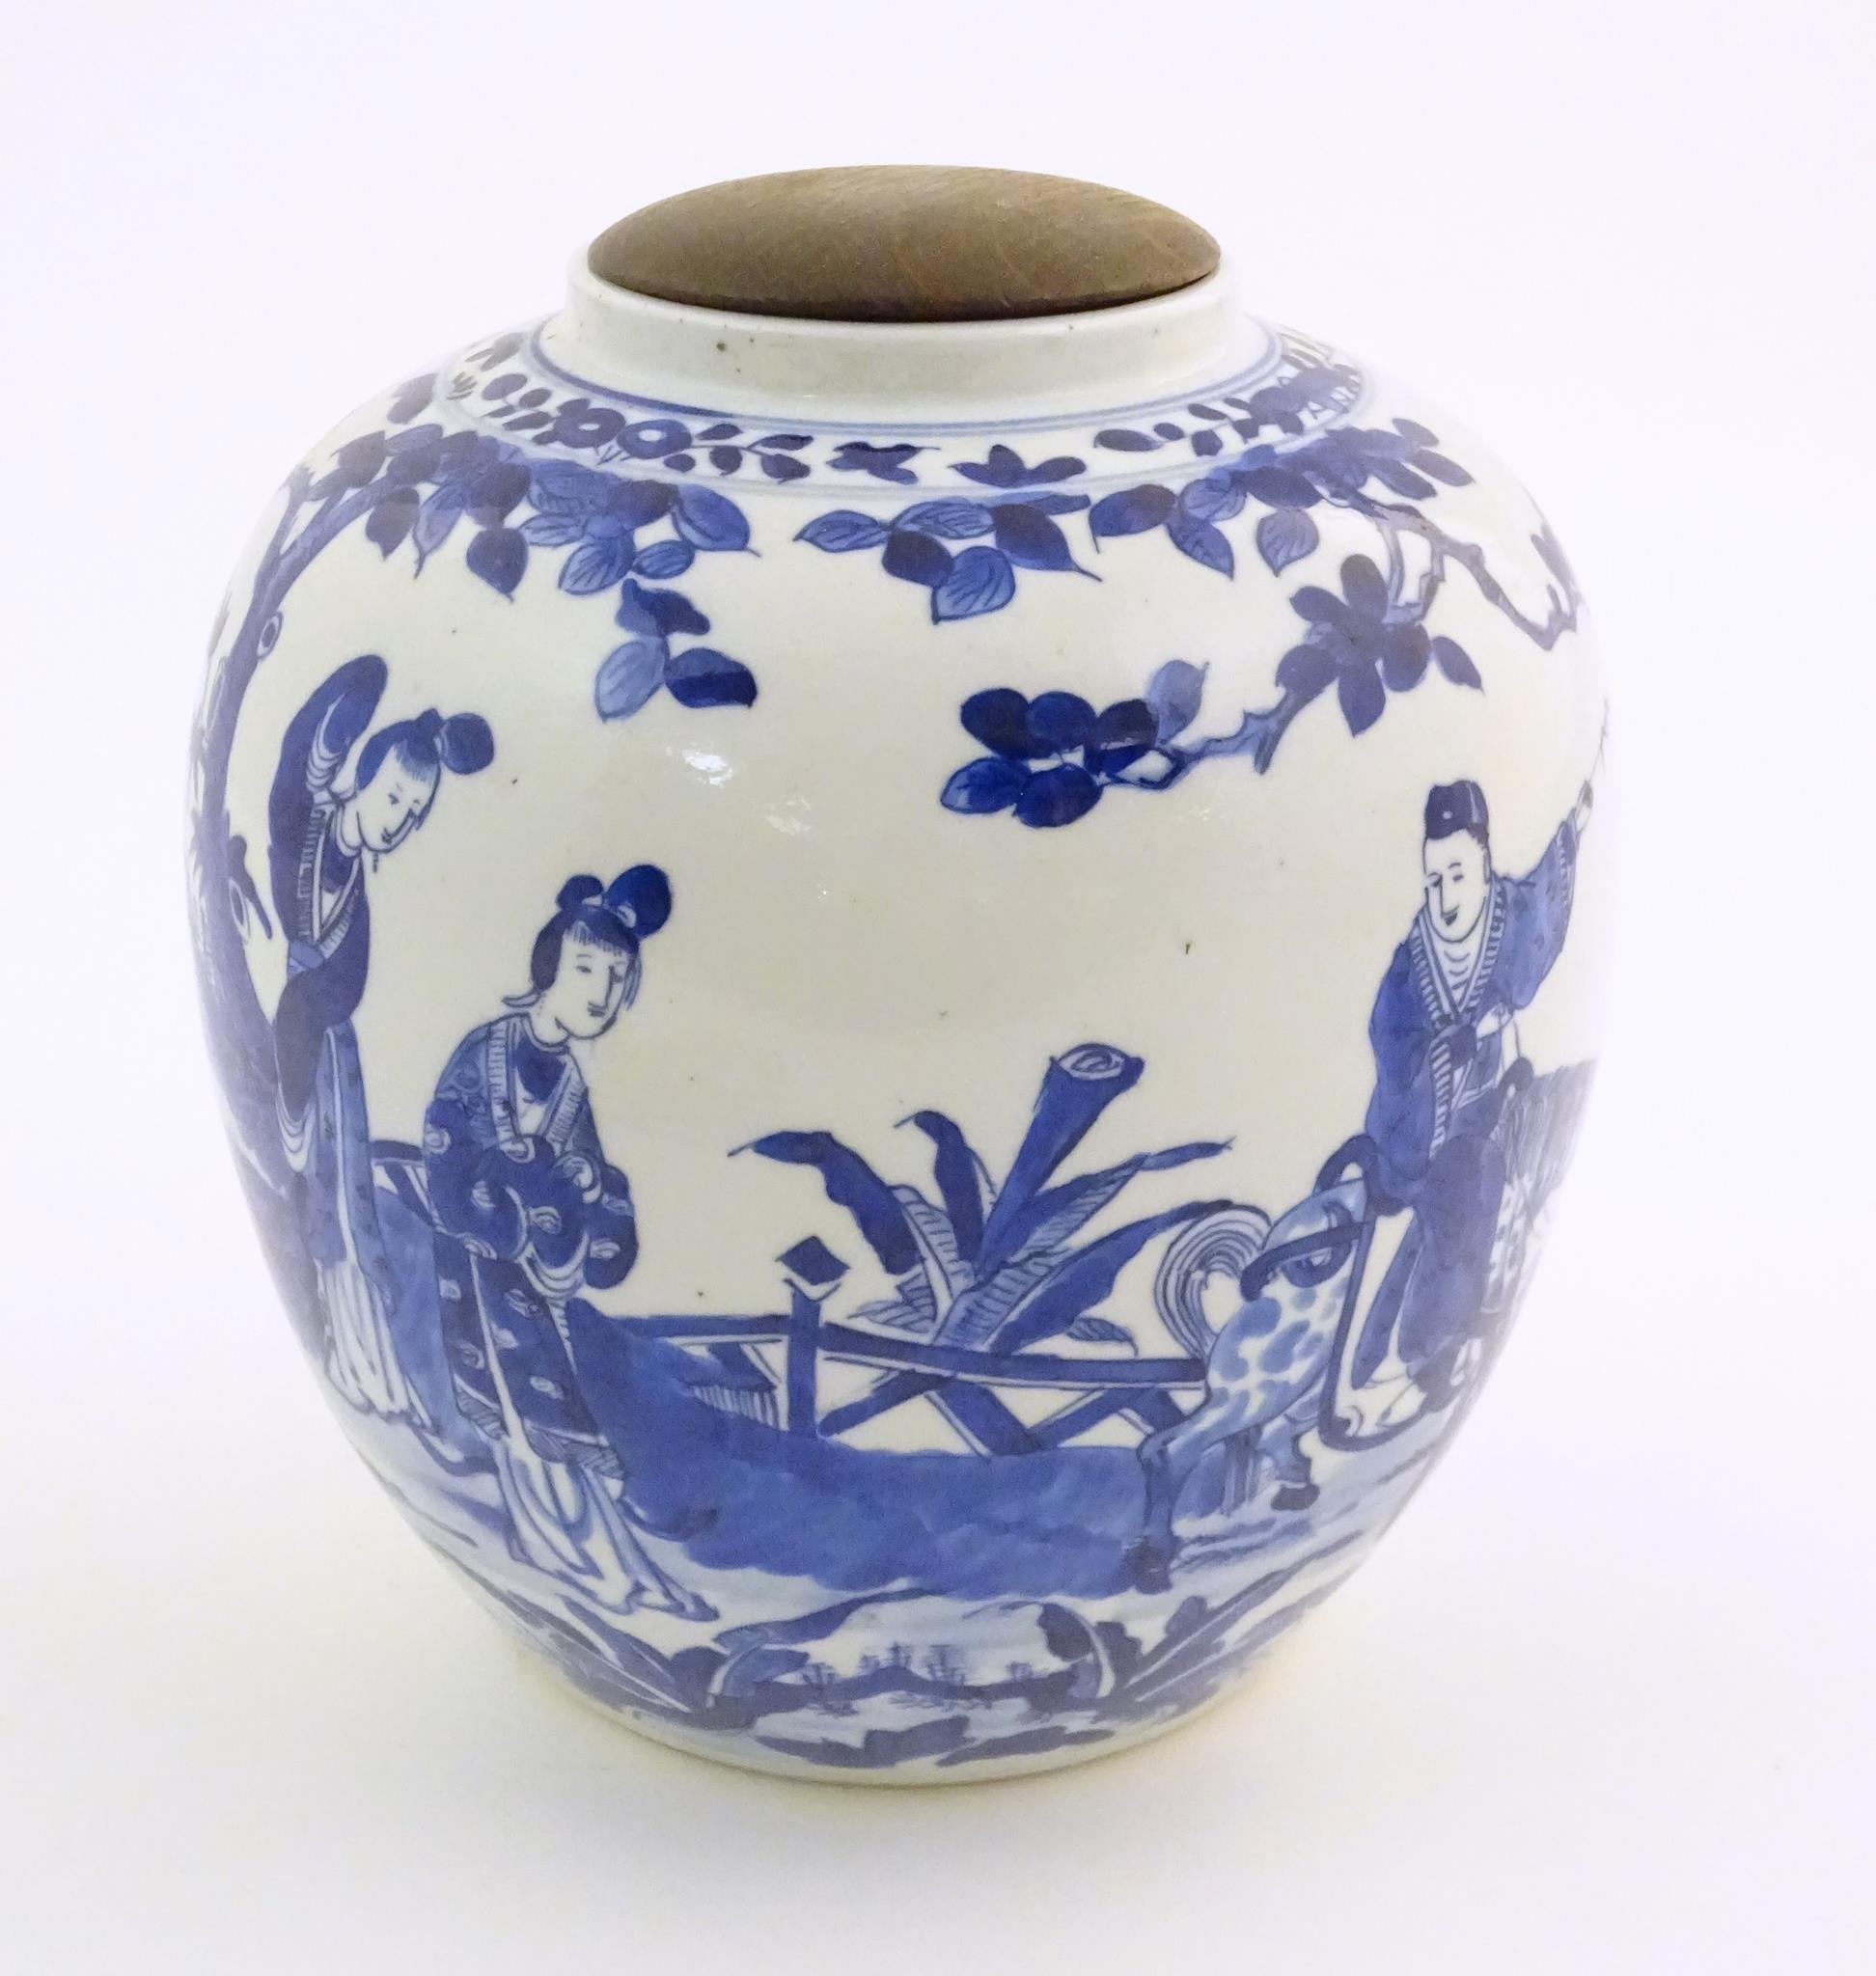 An Oriental blue and white ginger jar decorated with a landscape scene with a figure on horseback